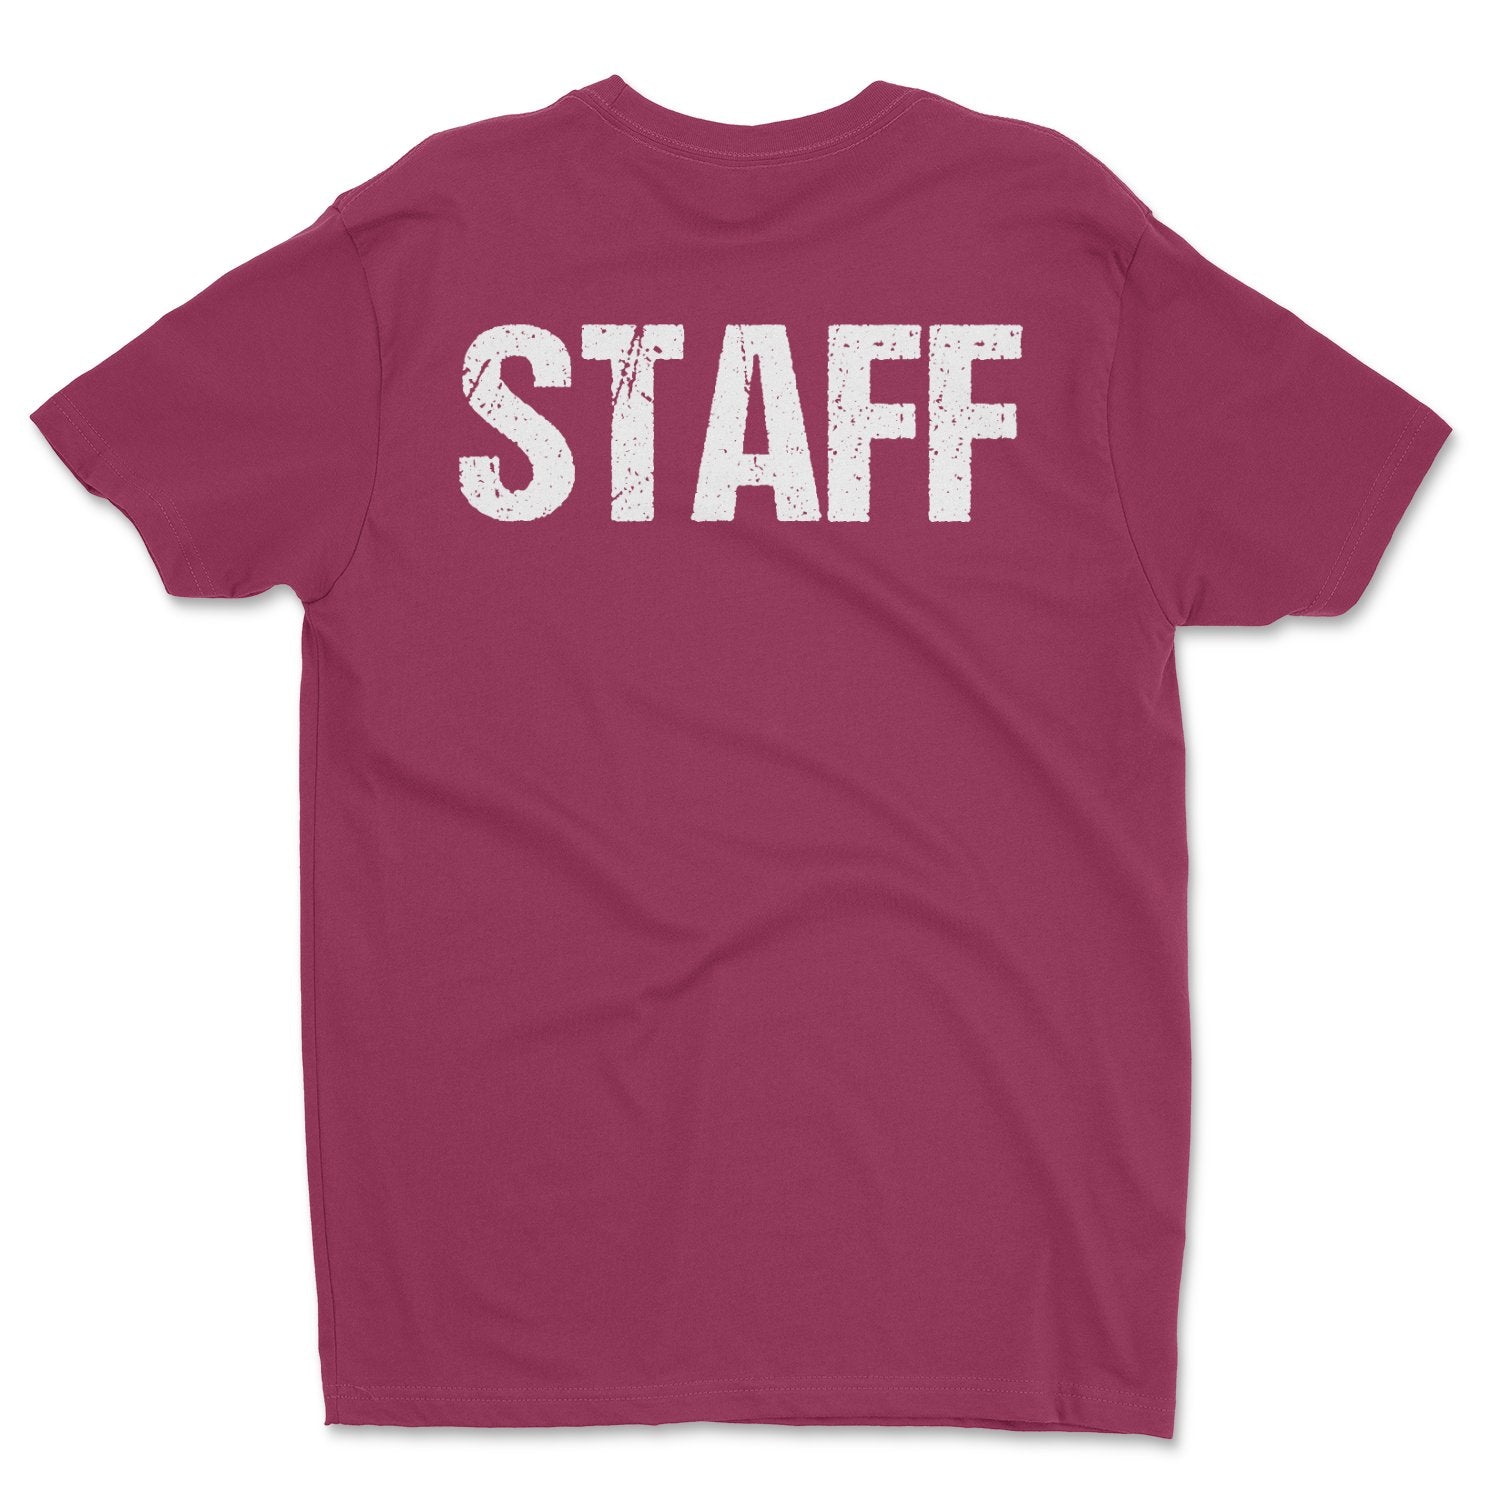 Staff T-Shirt Screen Printed Front & Back Men's Unisex Style (Maroon/White, Distressed)